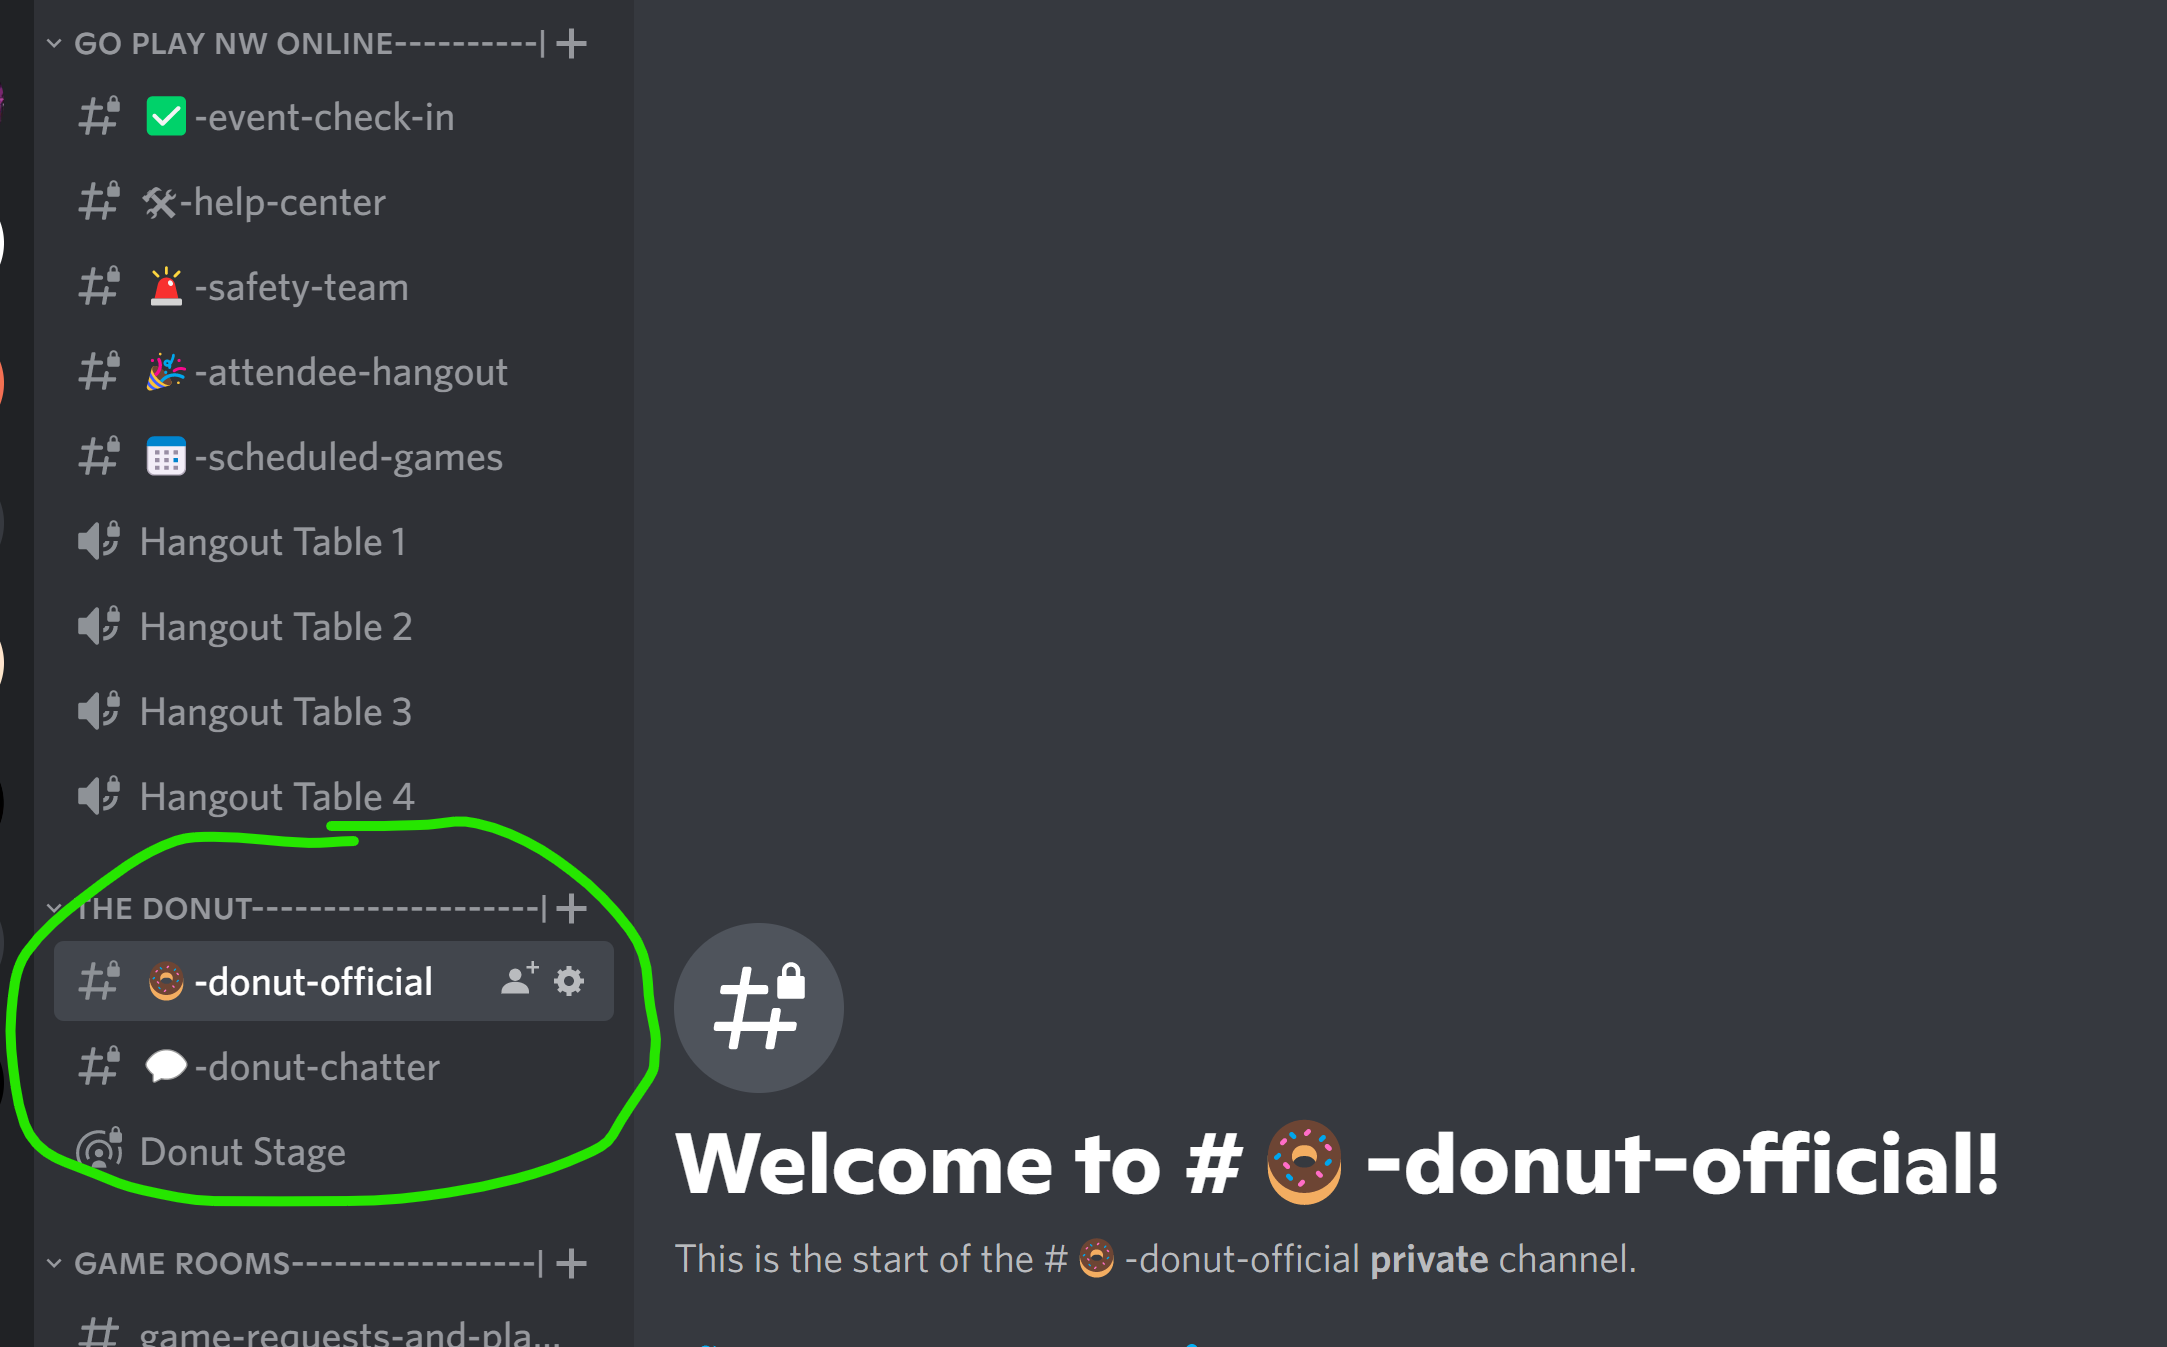 Screenshot of Go Play NW discord server with the Donut Category highlighted